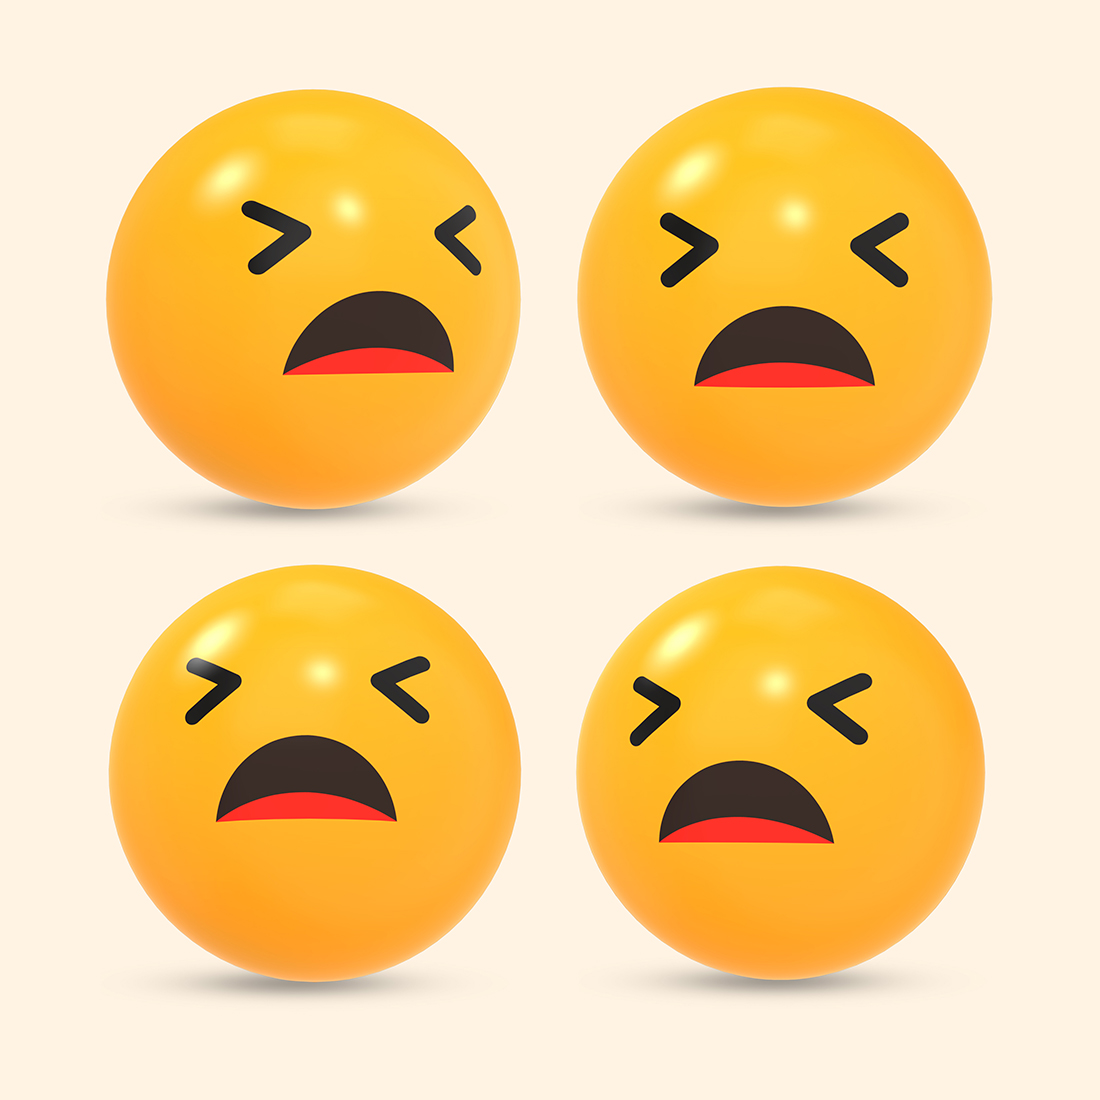 3D rendered social media icon of tired face emoji reaction with different view preview image.